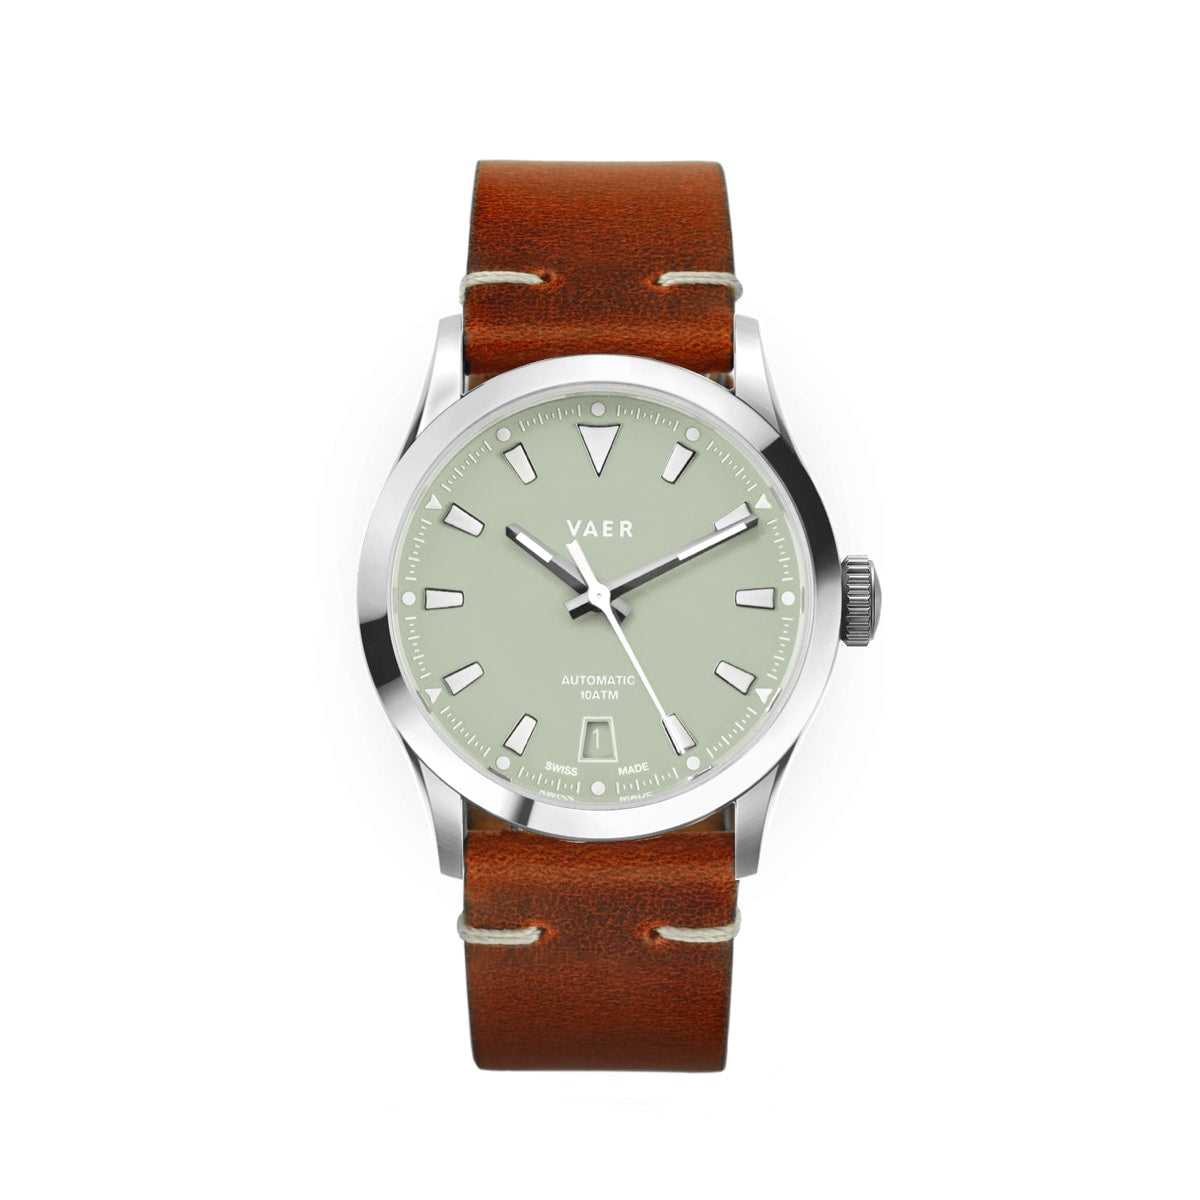 A7 Atlas Olive - Swiss Made Auto 36mm